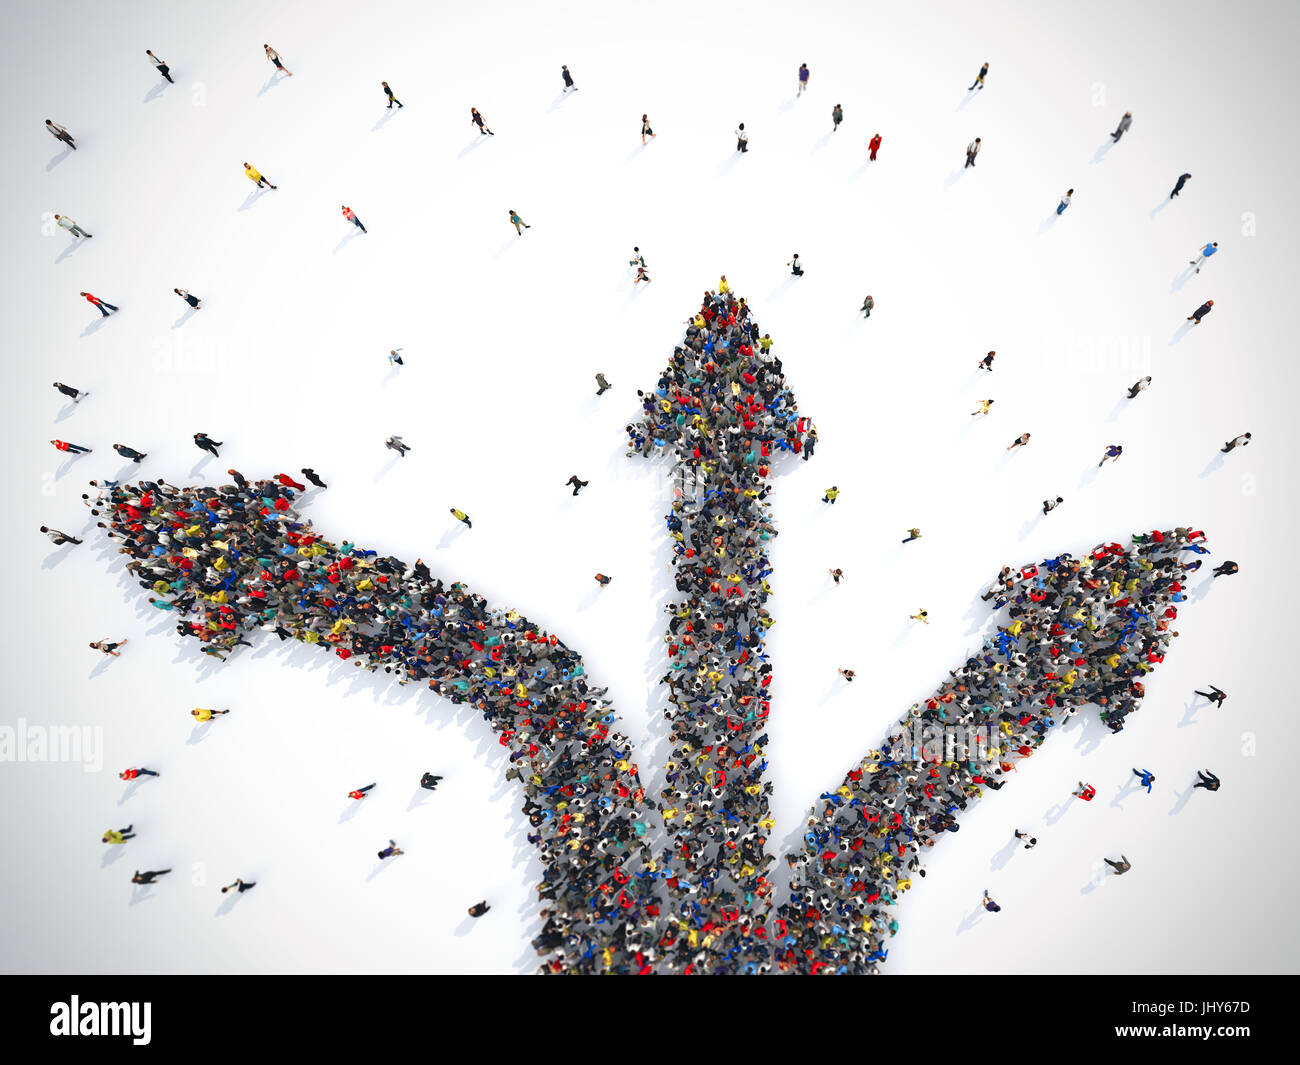 People have to choose the right direction. Concept of confusion. 3D Rendering Stock Photo